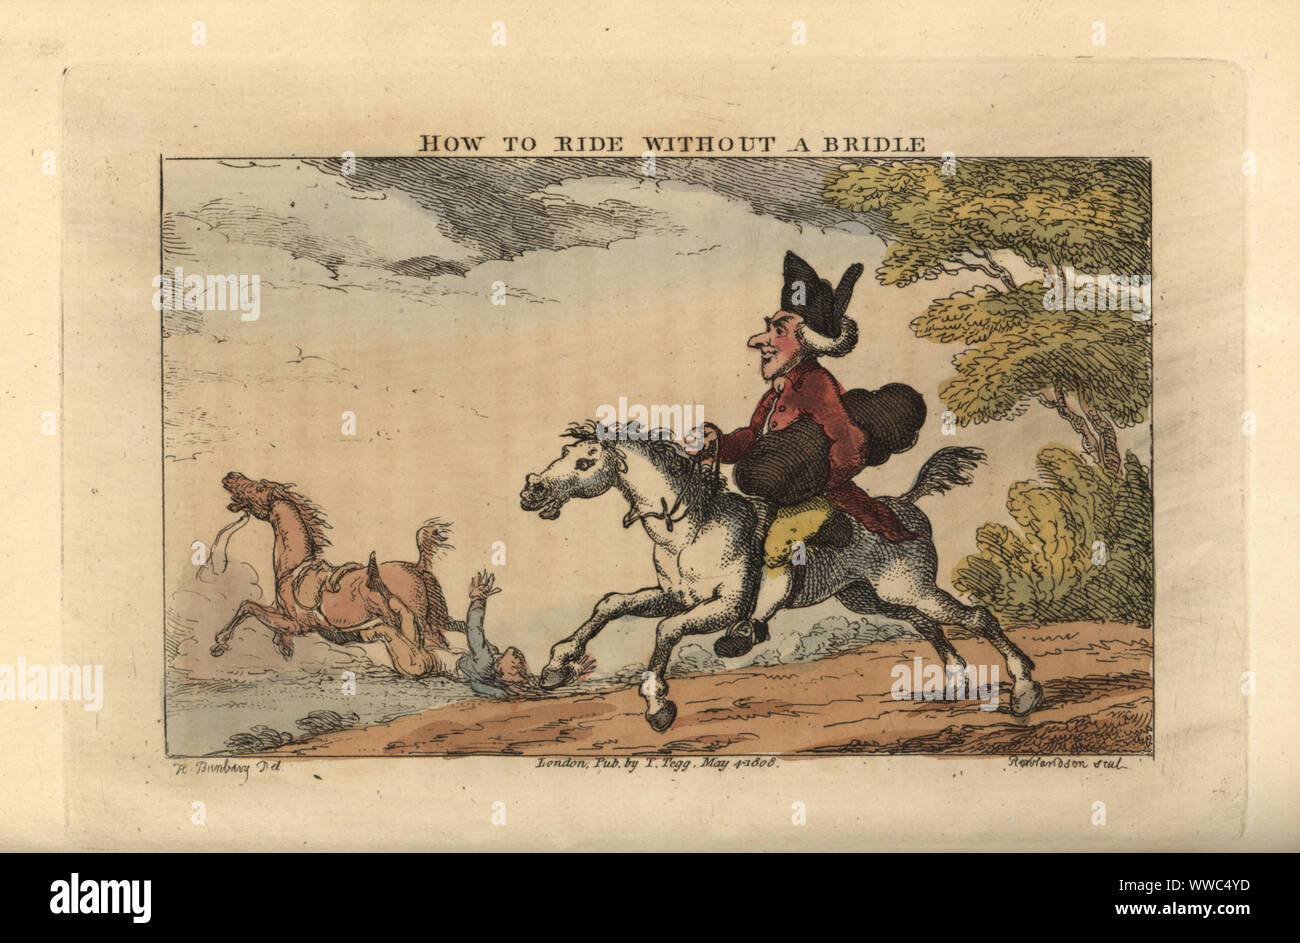 Regency gentleman riding a horse with only a string around its neck.  A man is dragged off by a horse, his foot caught in a stirrup, in the background. How to Ride Without a Bridle. Handcoloured copperplate engraving by Thomas Rowlandson after an illustration by Henry Bunbury from Geoffrey Gambado’s An Academy for Grown Horsemen and Annals of Horsemanship, London, 1809. Stock Photo